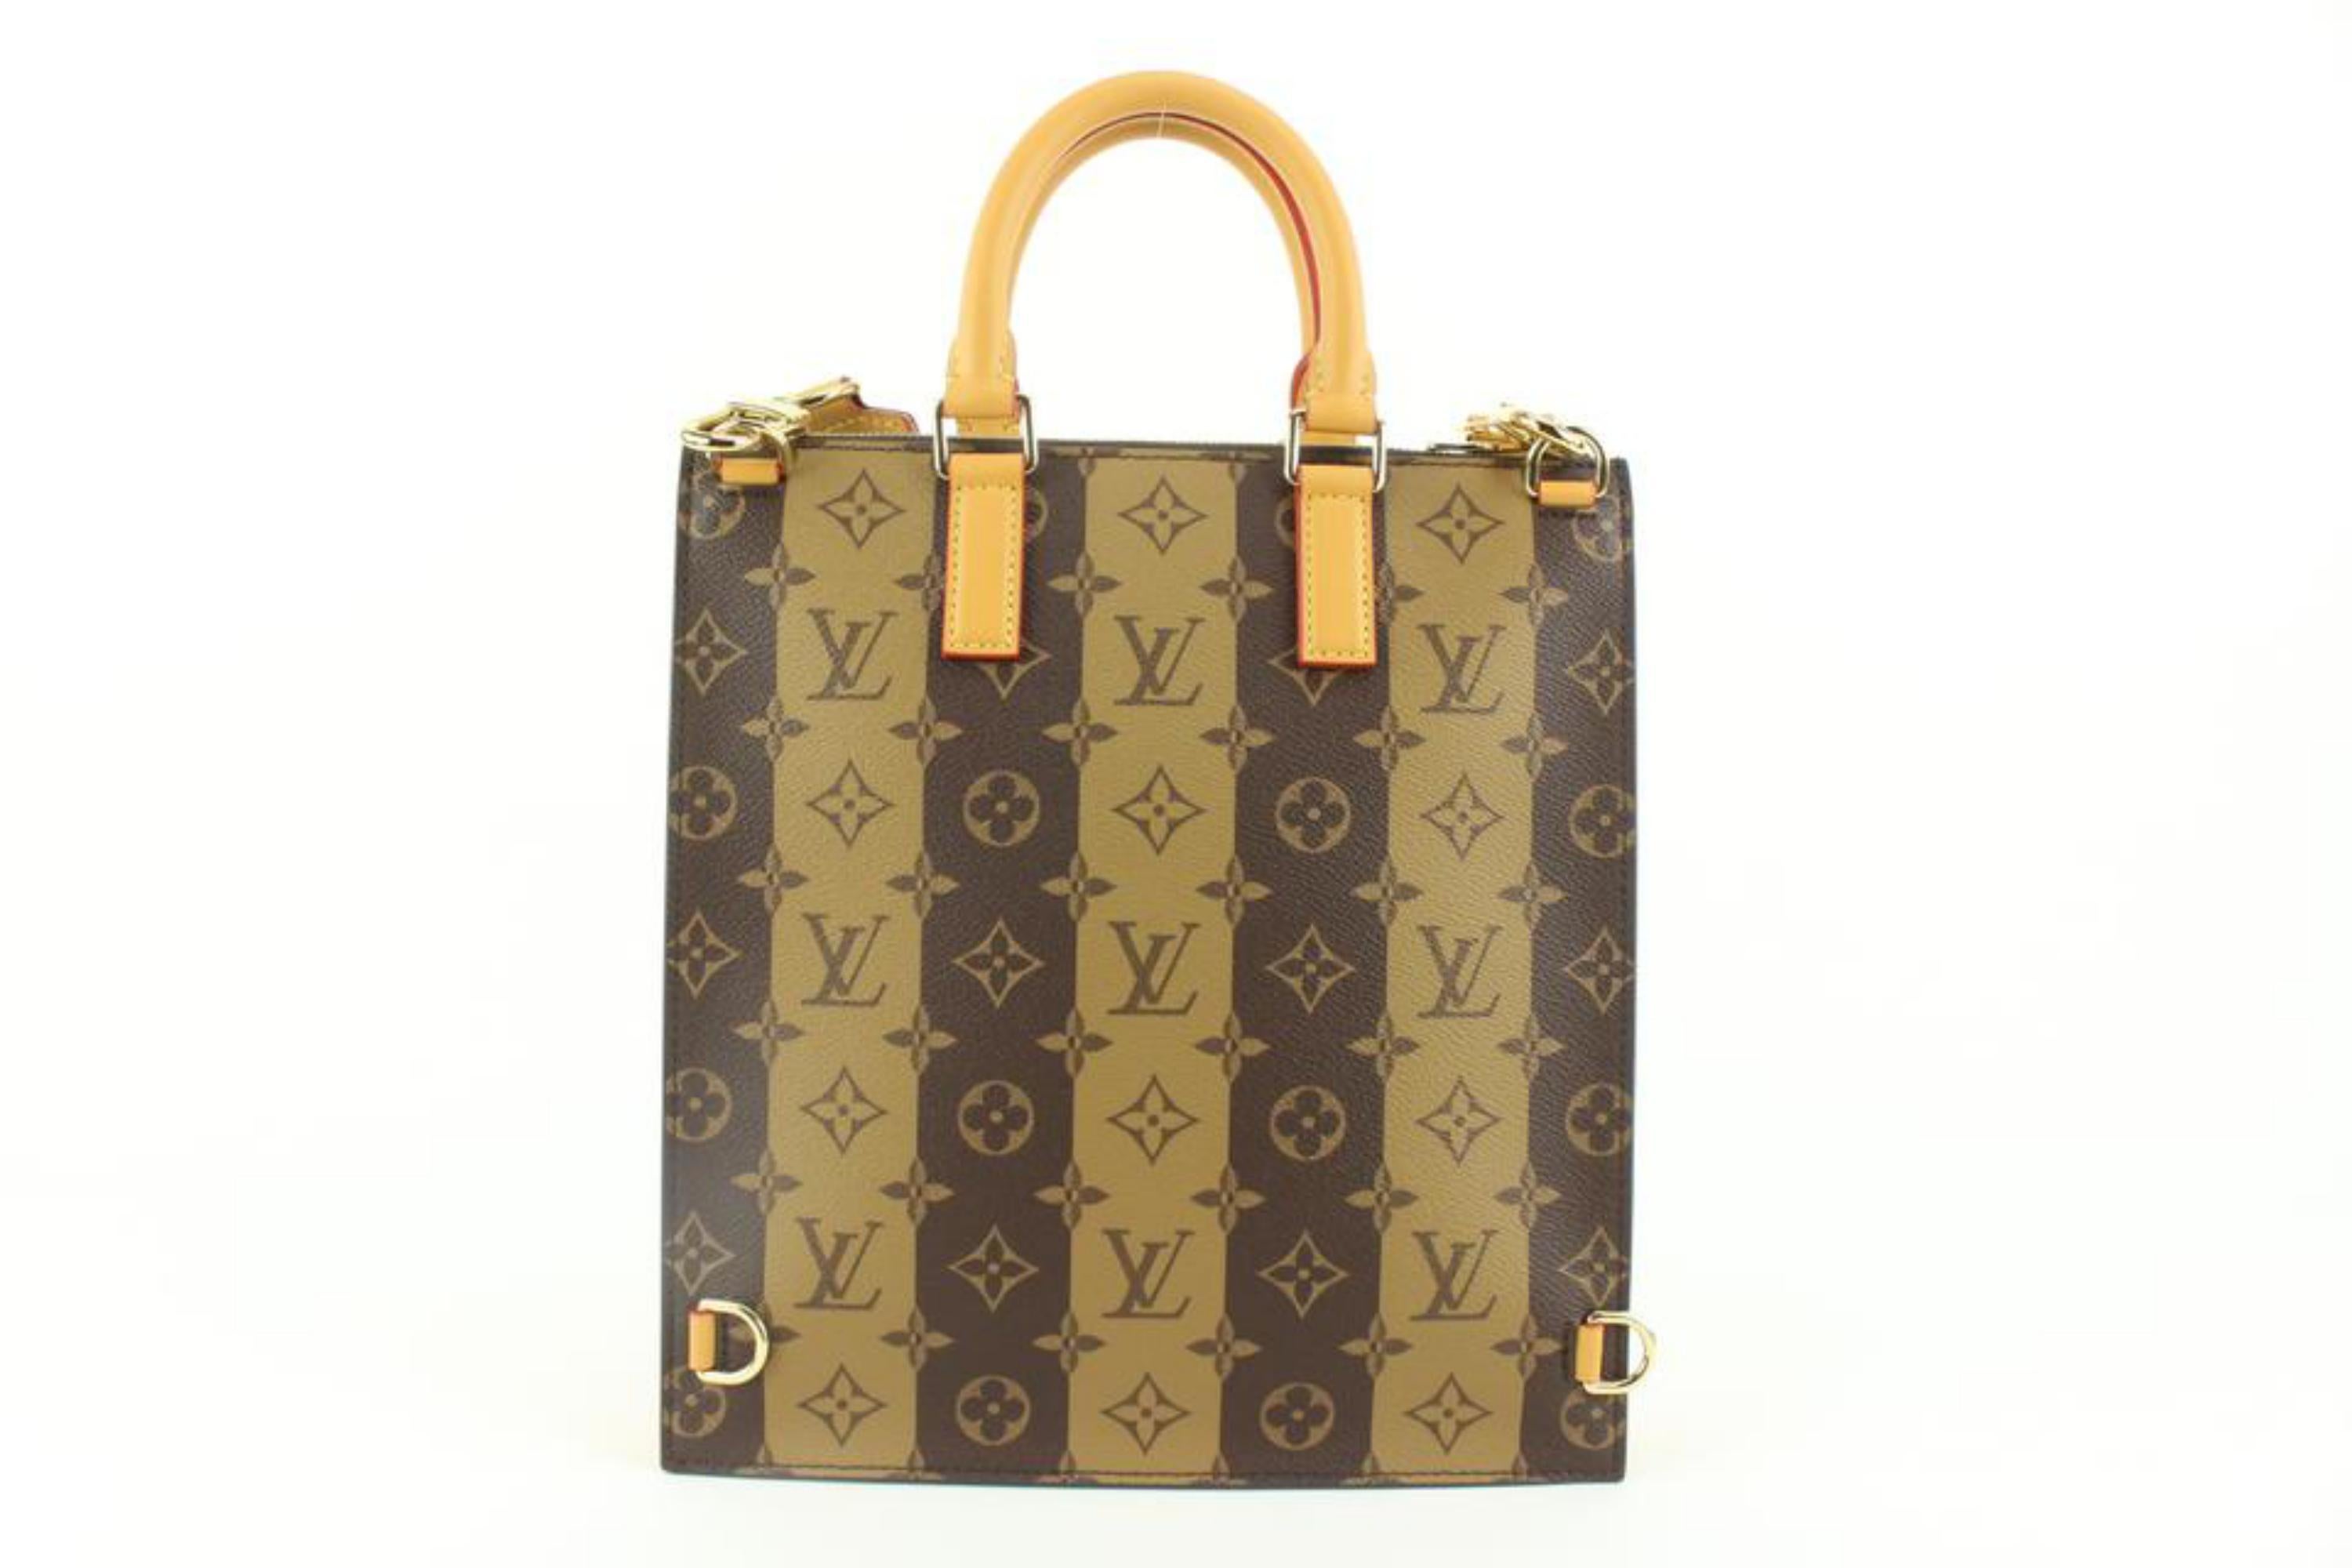 Louis Vuitton Virgil Abloh x Nigo LV Made Monogram Stripe Sac Plat 1231lv17 In New Condition For Sale In Dix hills, NY